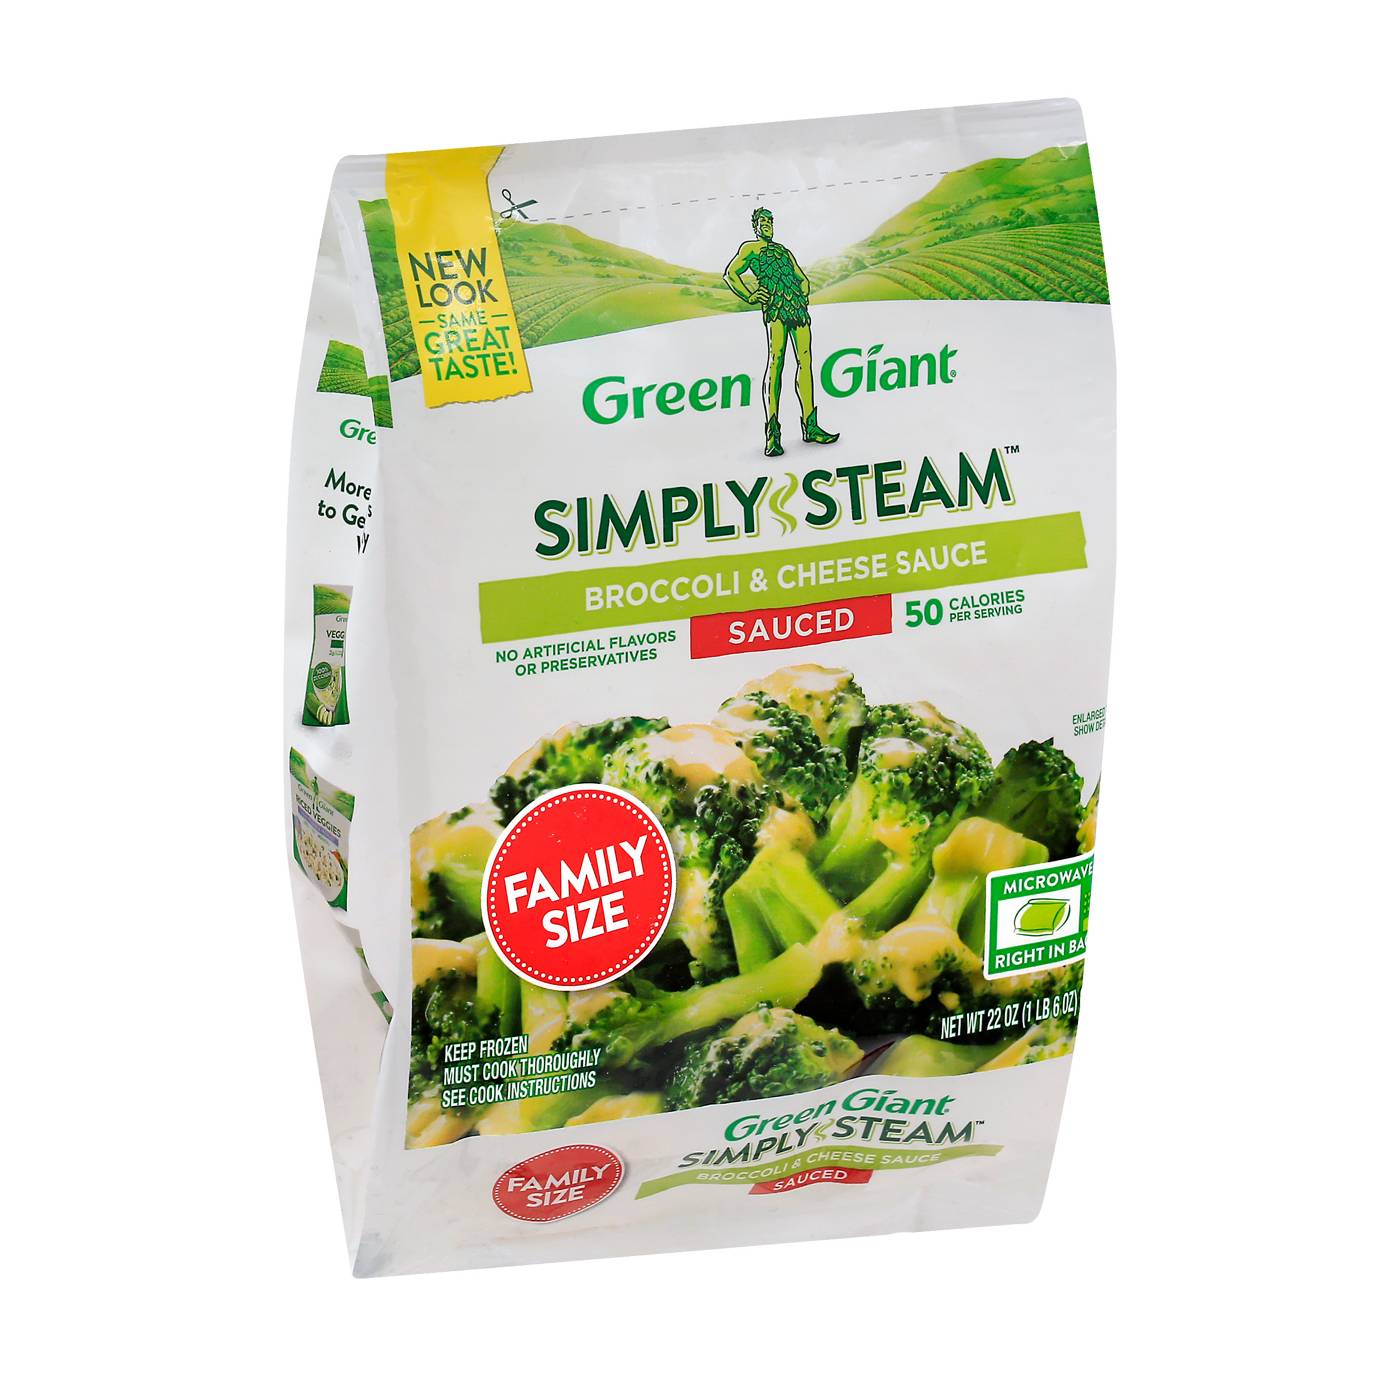 Green Giant Simply Steam Broccoli & Cheese Sauce Family Size; image 2 of 3